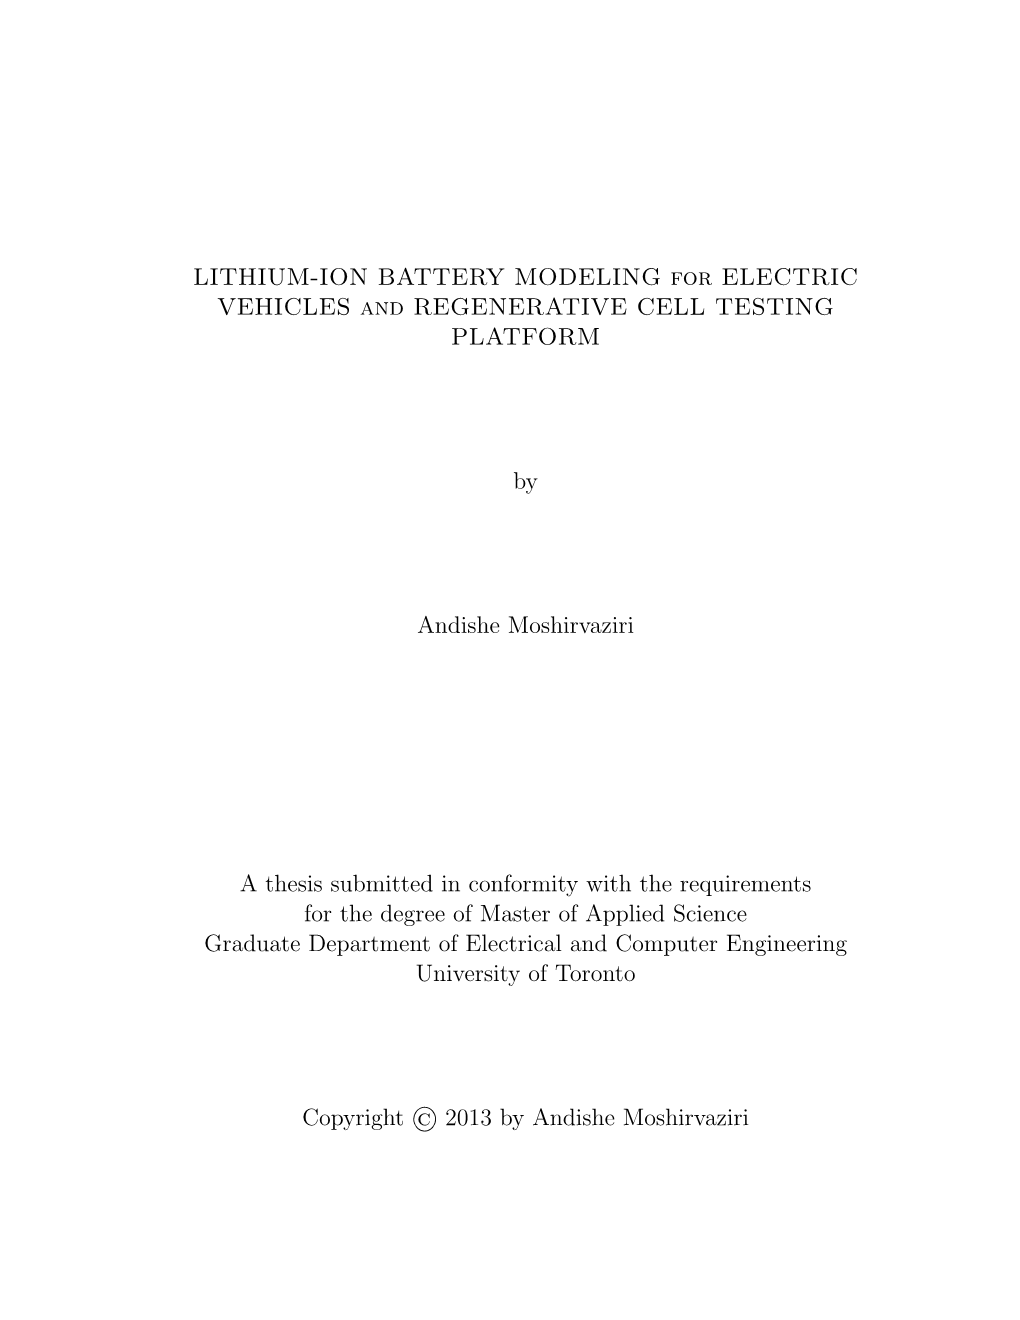 LITHIUM-ION BATTERY MODELING for ELECTRIC VEHICLES and REGENERATIVE CELL TESTING PLATFORM